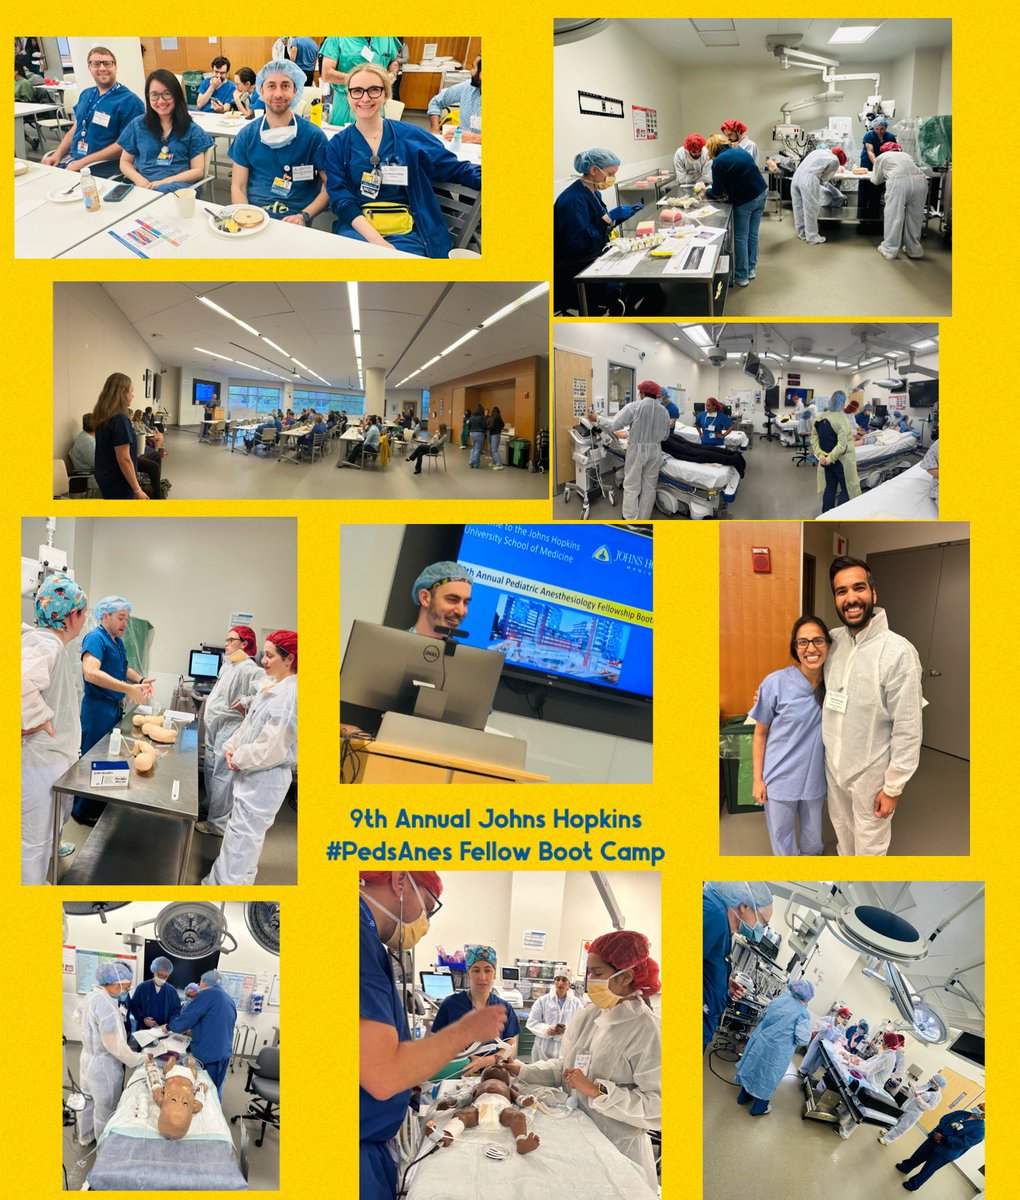 We are only 45 minutes into the 𝟗𝐭𝐡 𝐀𝐧𝐧𝐮𝐚𝐥 @JHPedsAnes 𝐅𝐞𝐥𝐥𝐨𝐰 𝐁𝐨𝐨𝐭 𝐂𝐚𝐦𝐩 & WOW! 🤩 High fidelity OR #simulation, #regionalanesthesia, mass casualty training, the learning is boundless! Thanks to all the amazing #PedsAnes Fellows & faculty joining us…